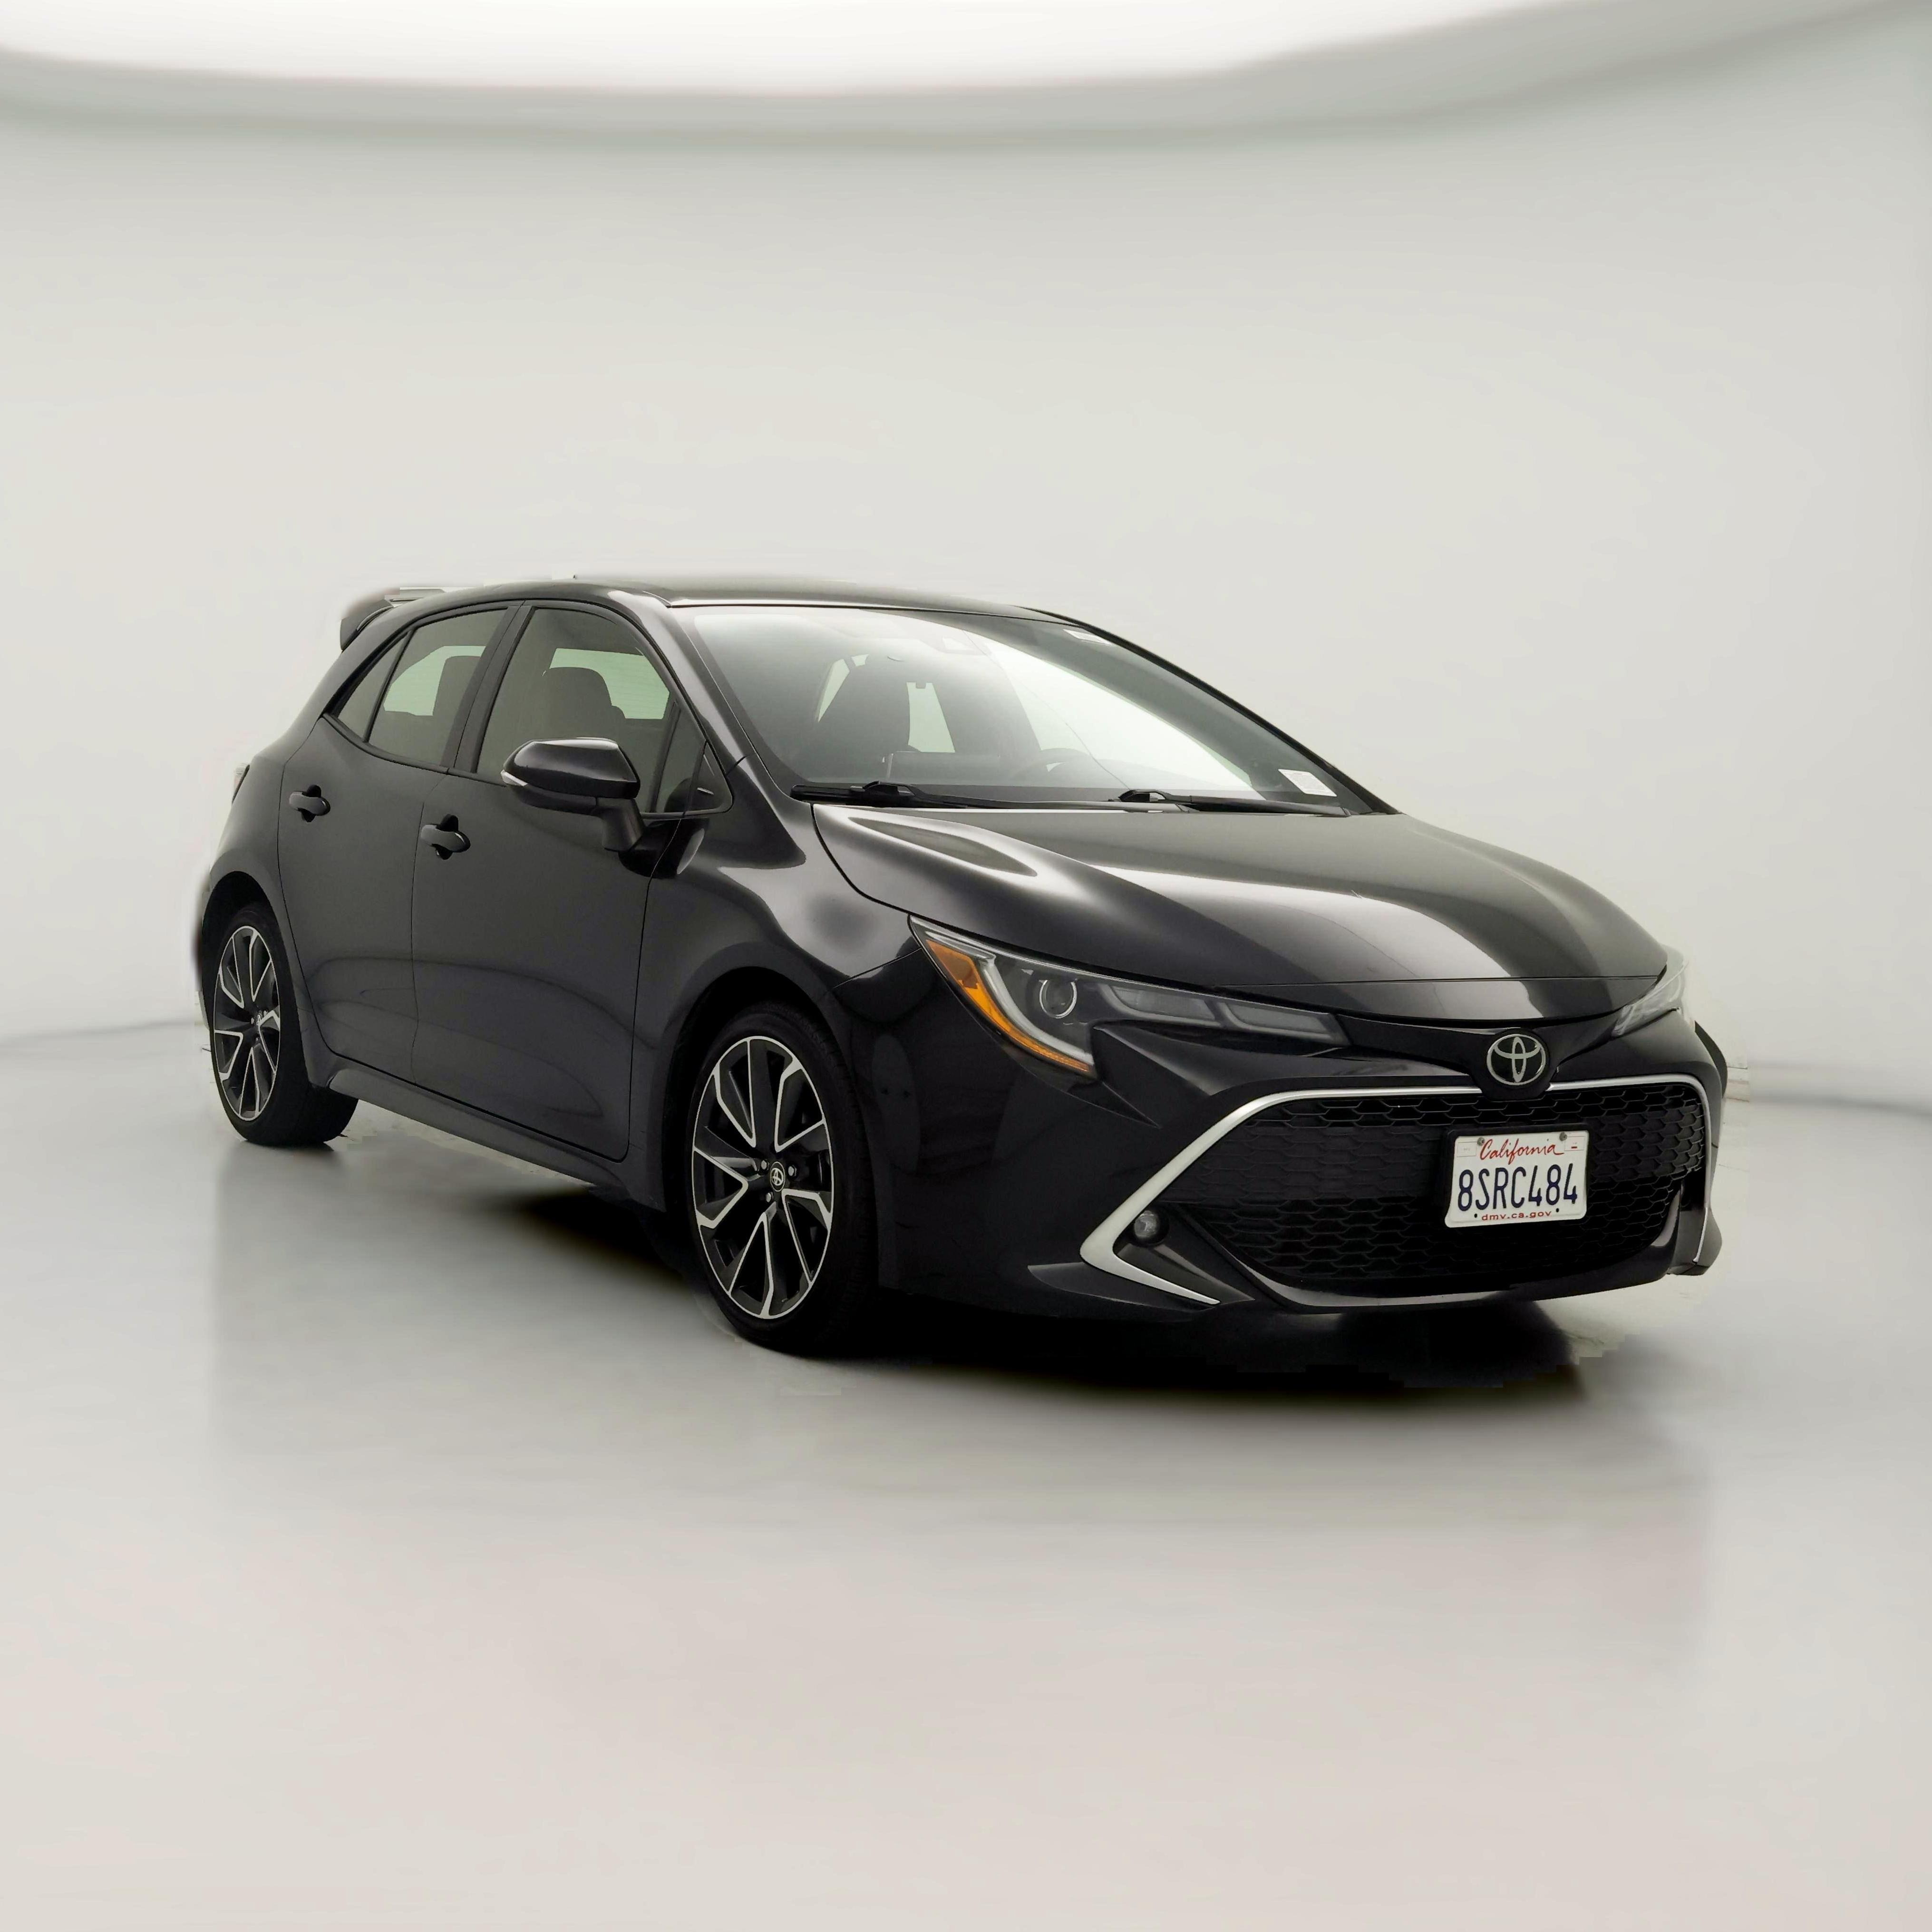 Used 2021 Toyota Corolla Hatchback for Sale